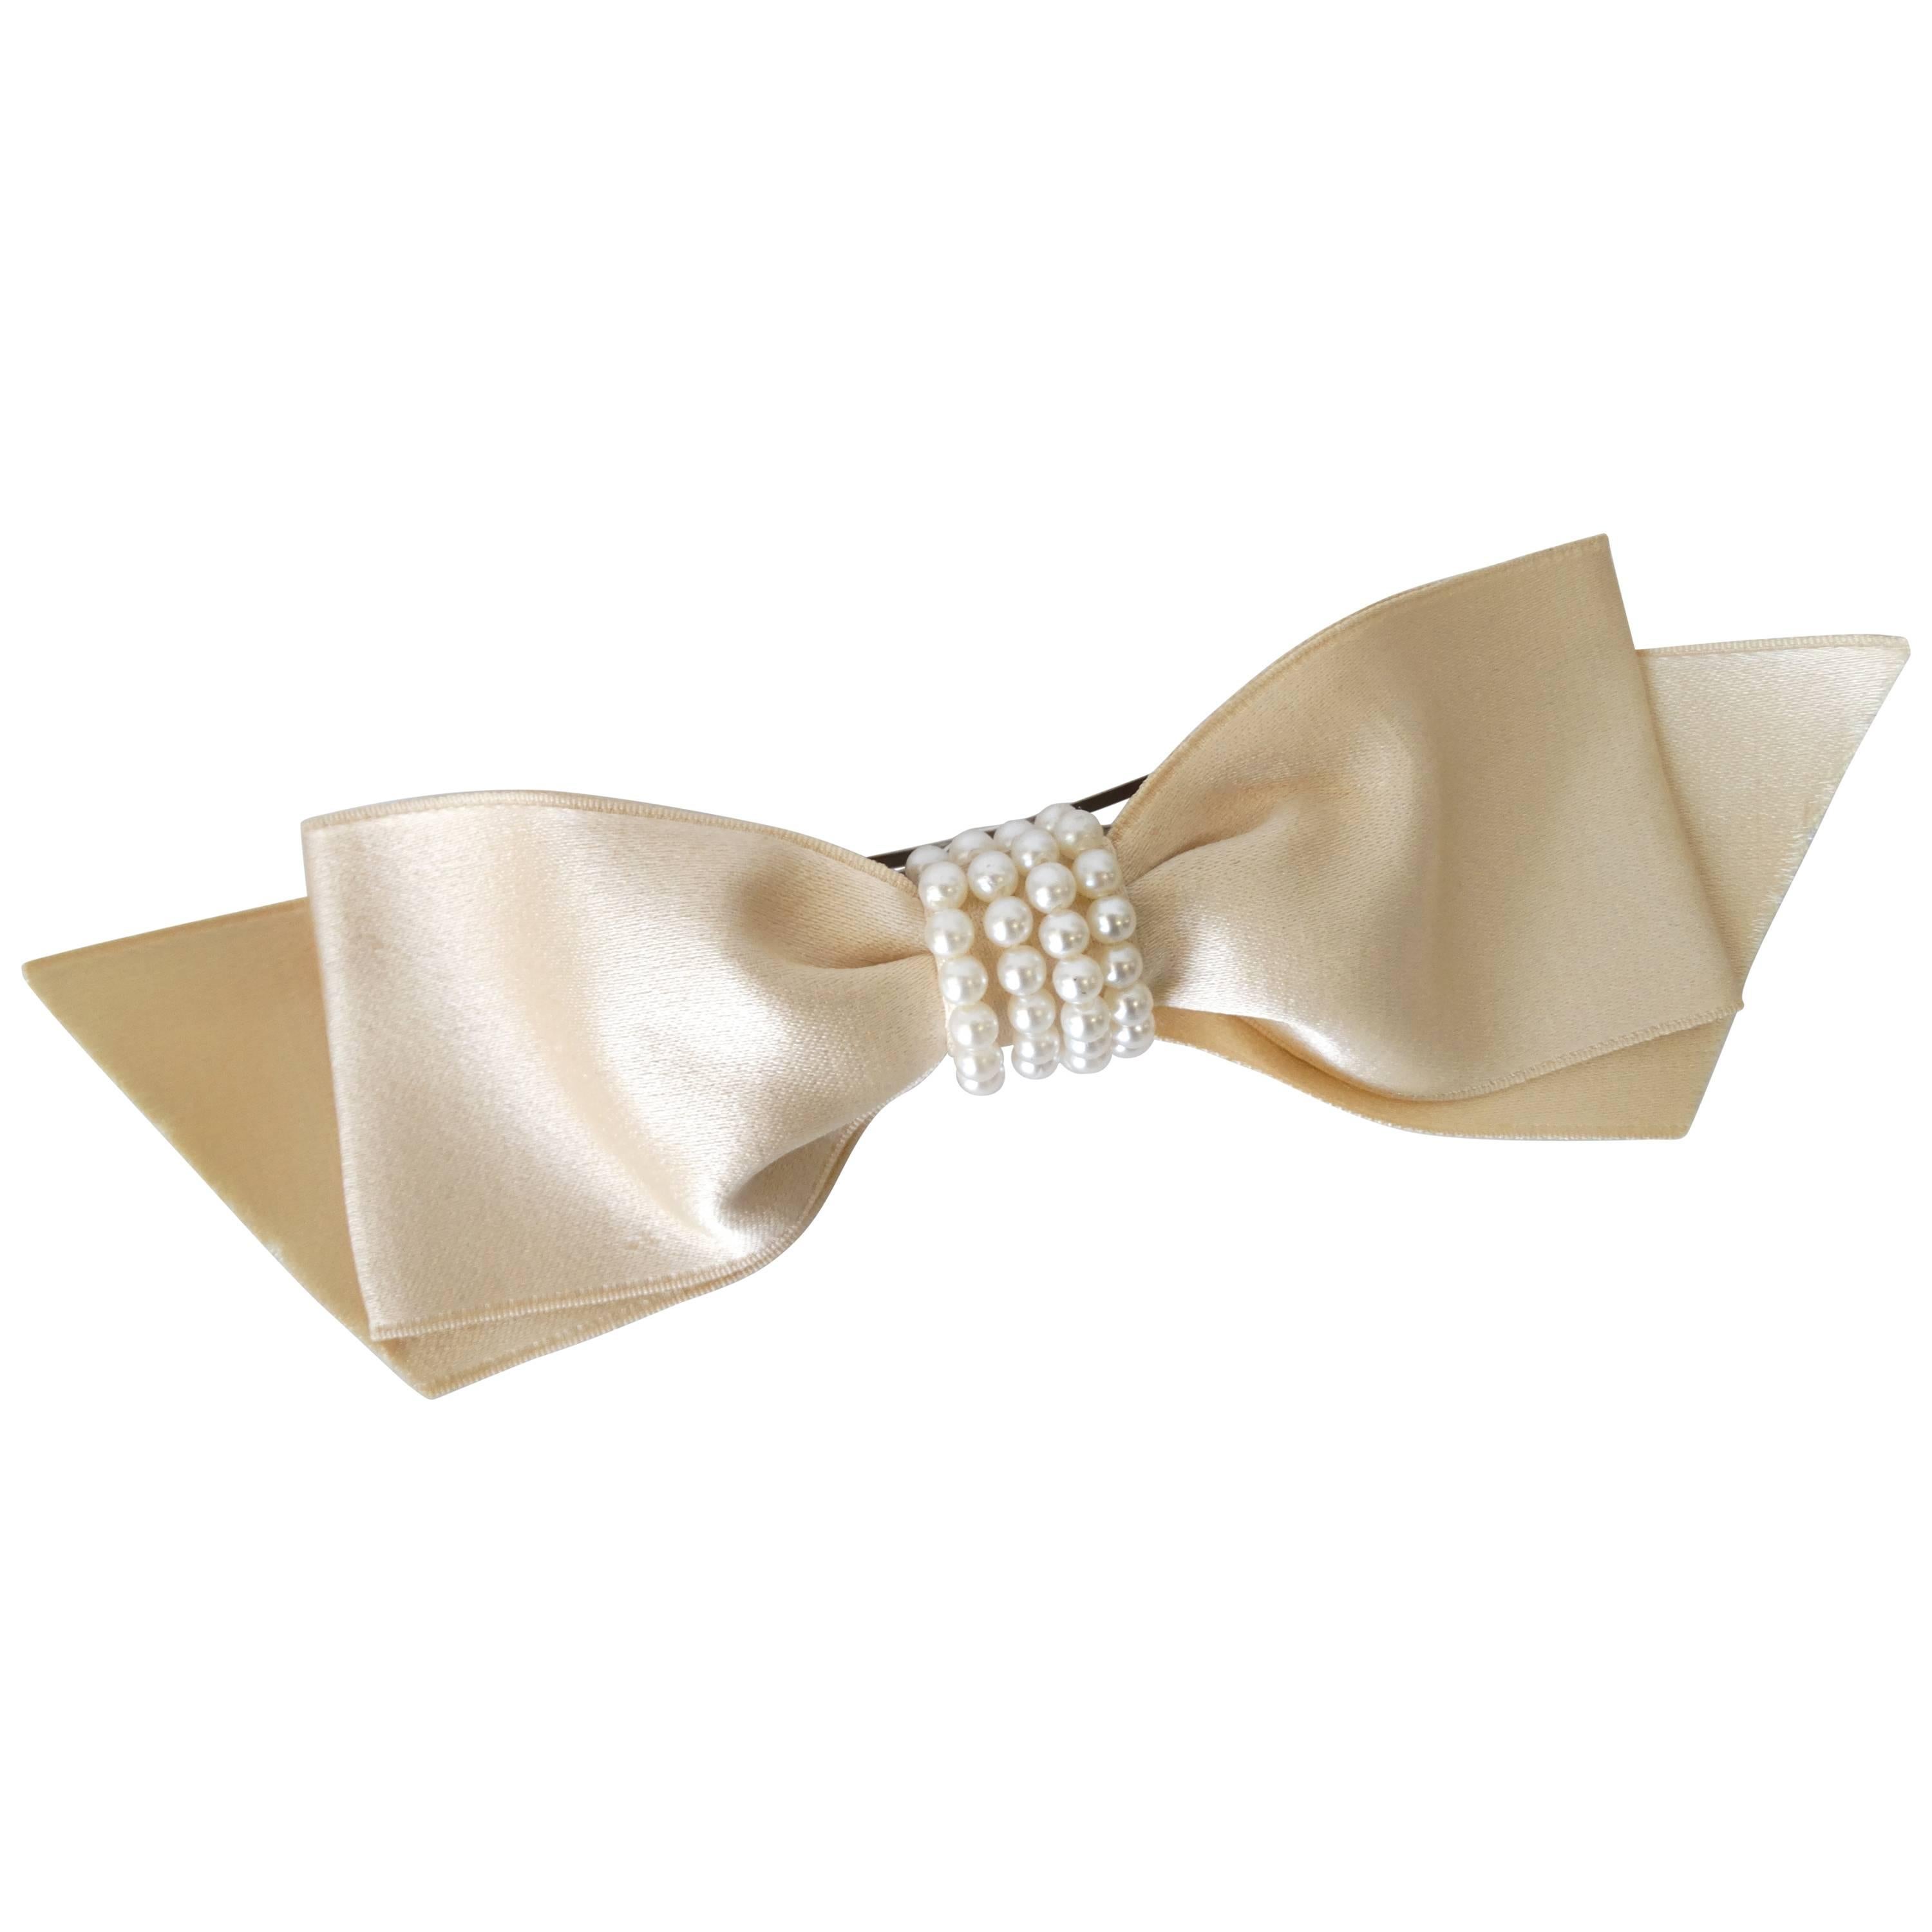 1980s Chanel Cream Satin Bow Barrette with Pearls 